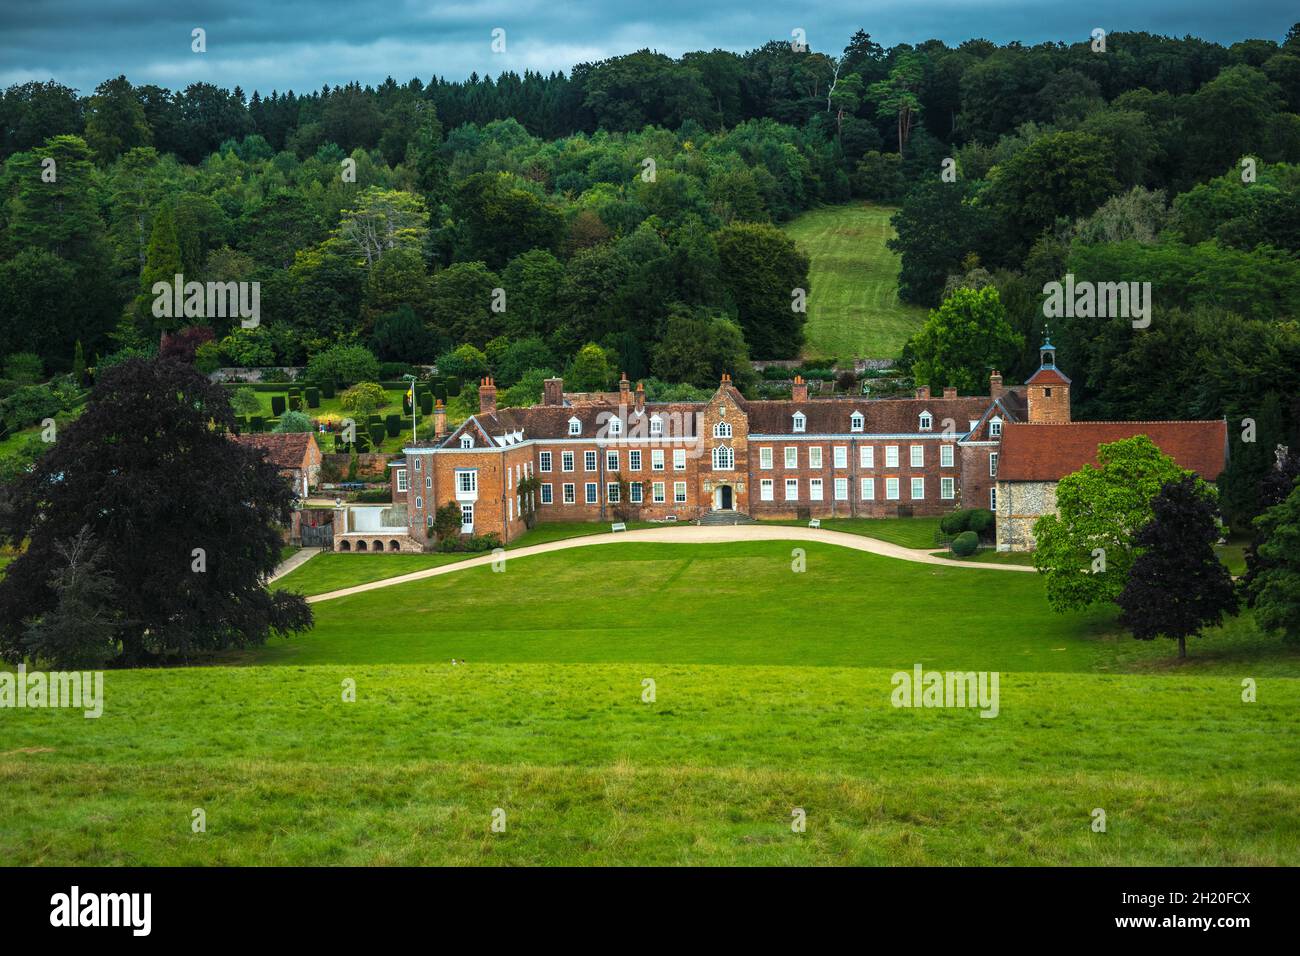 View of a the grand historic country house Stonor Park situated in the Chiltern Hills near Henley-on-Thames Oxfordshire England UK Stock Photo